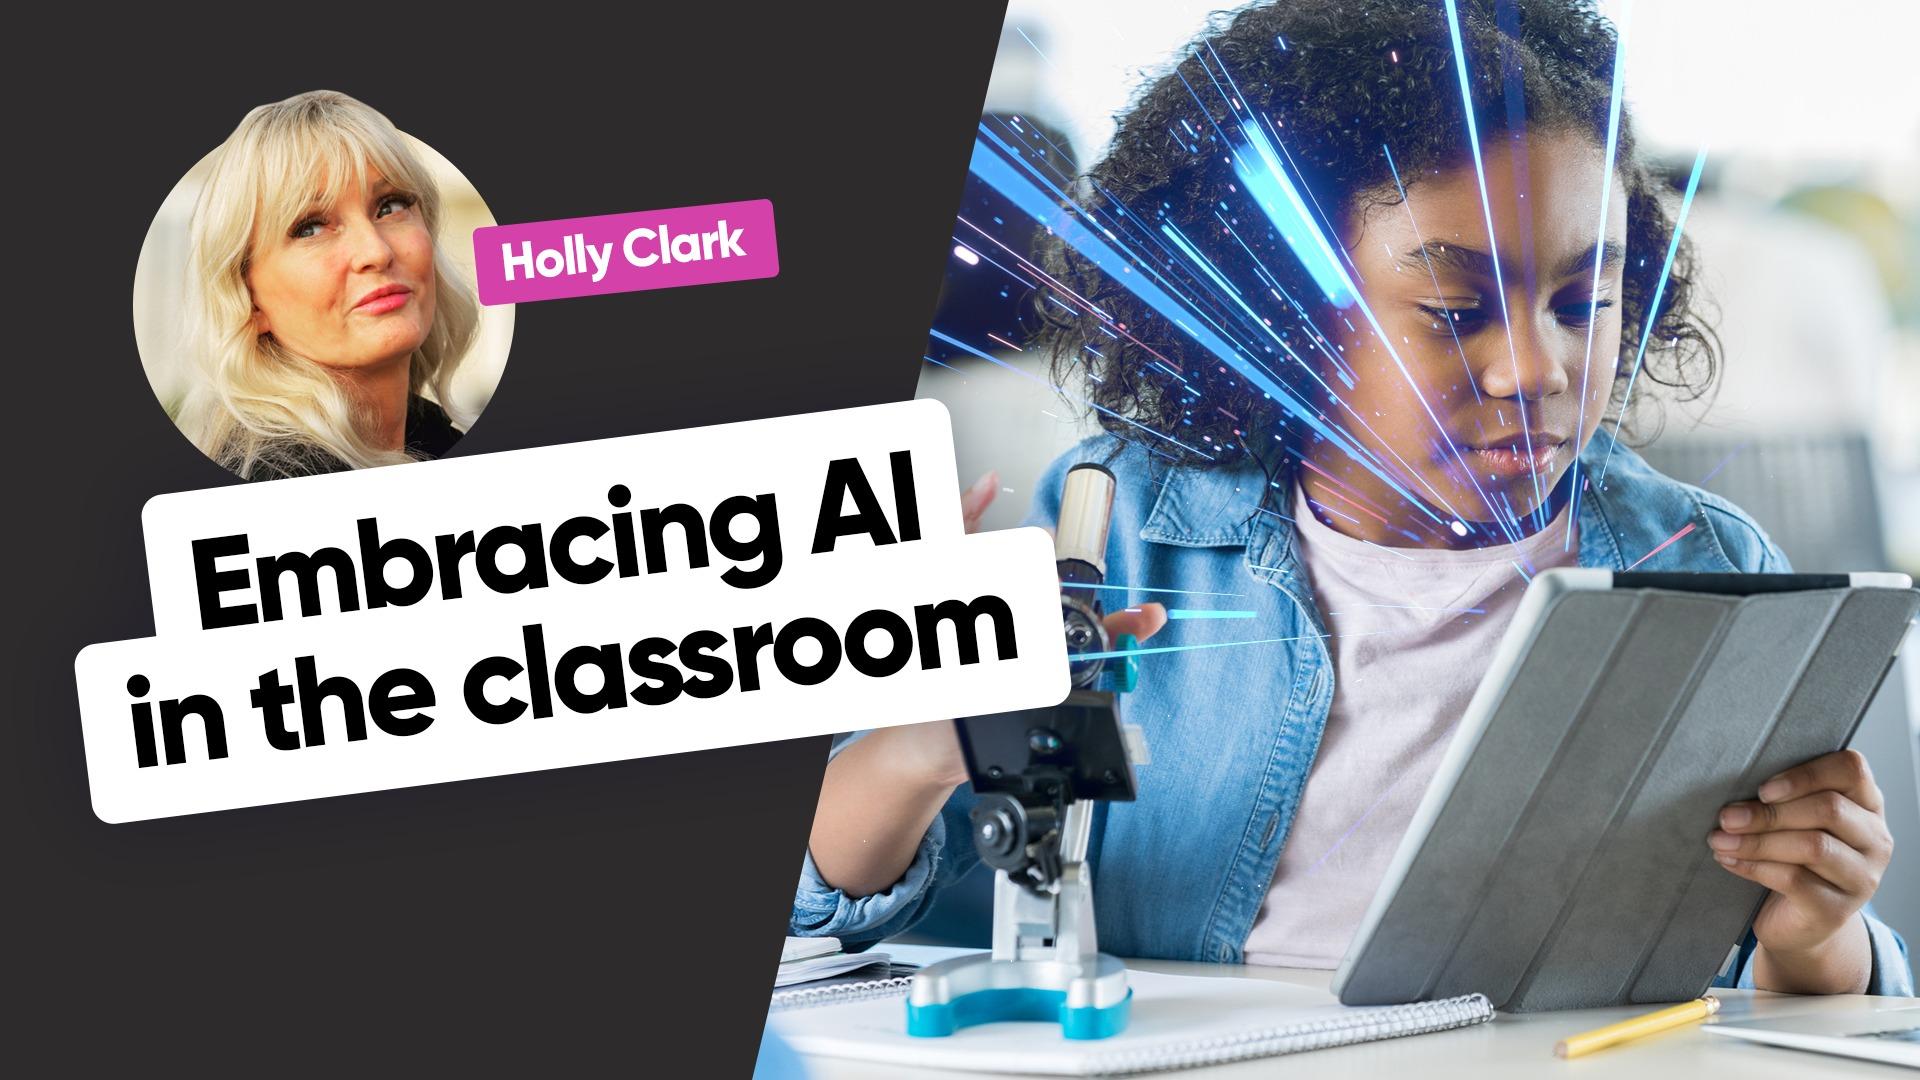 Why embrace AI in the classroom